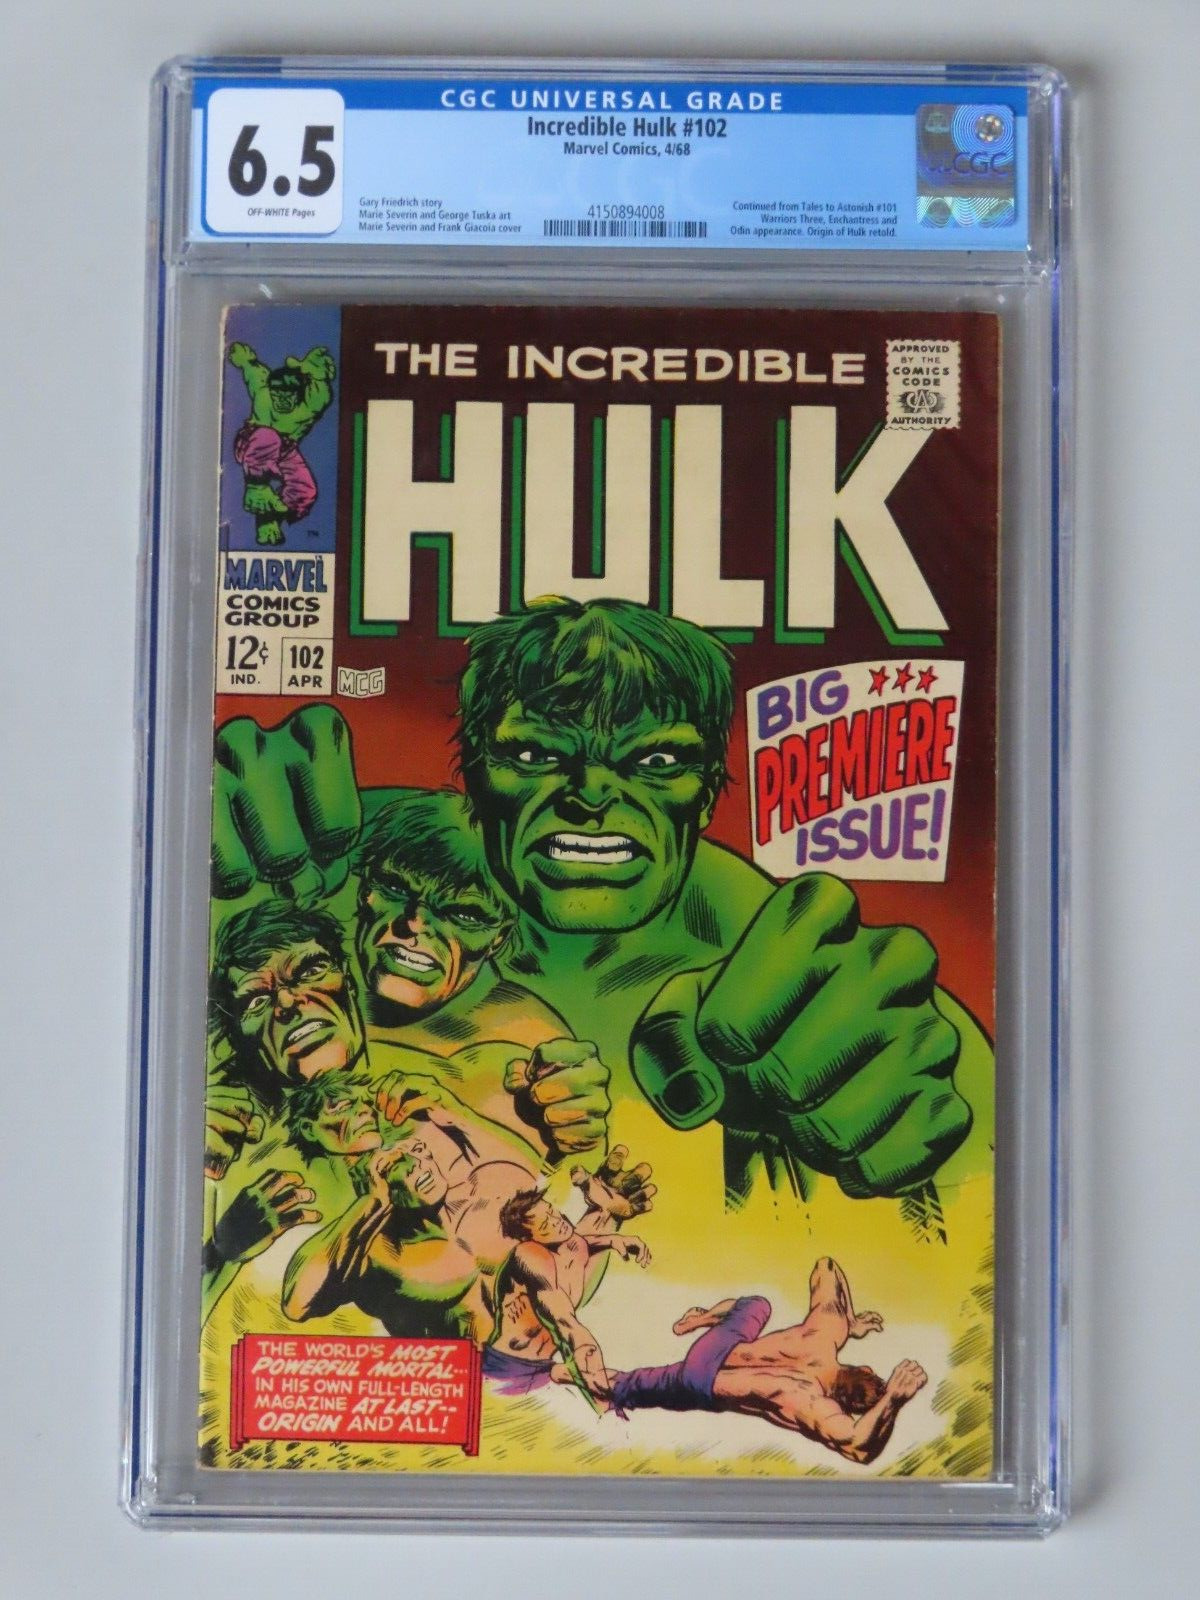 Incredible Hulk #102 (1968) - CGC 6.5 - Silver Age Key - Premiere Issue